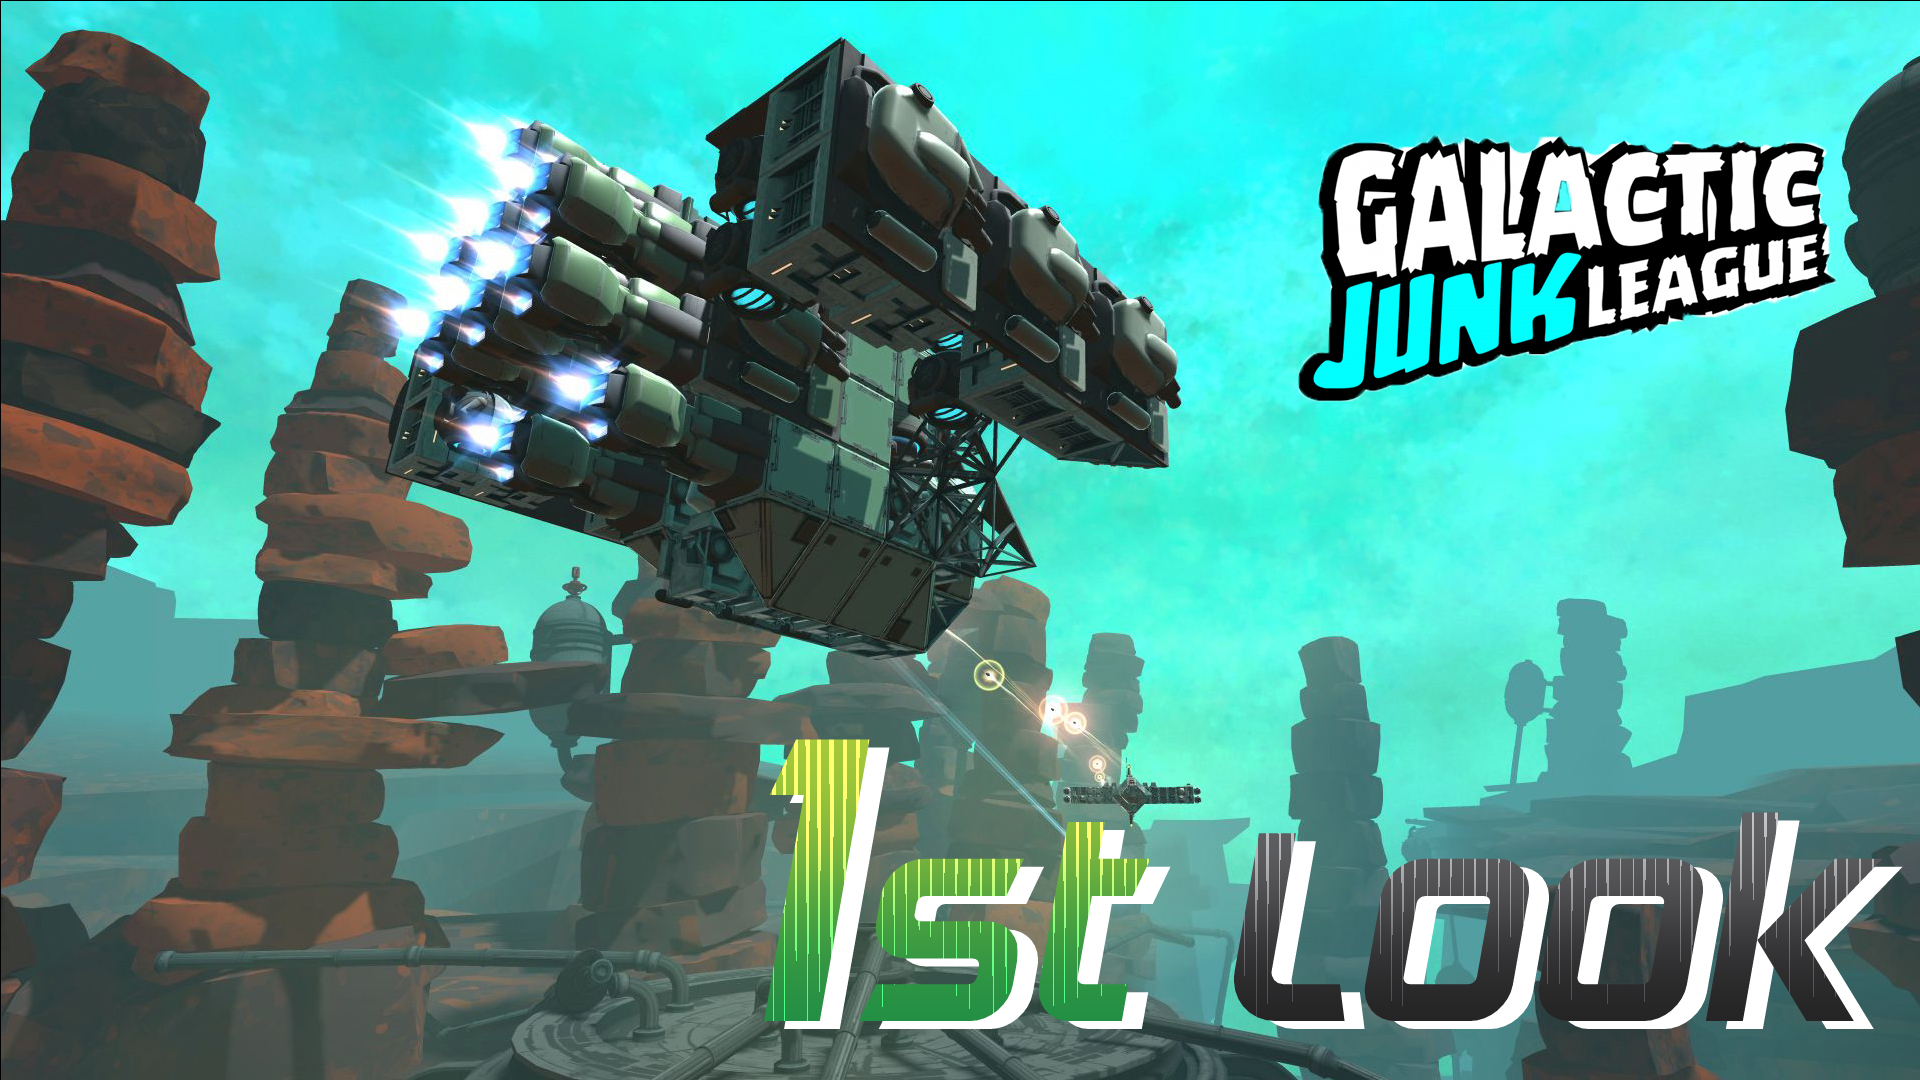 Galactic Junk League - First Look